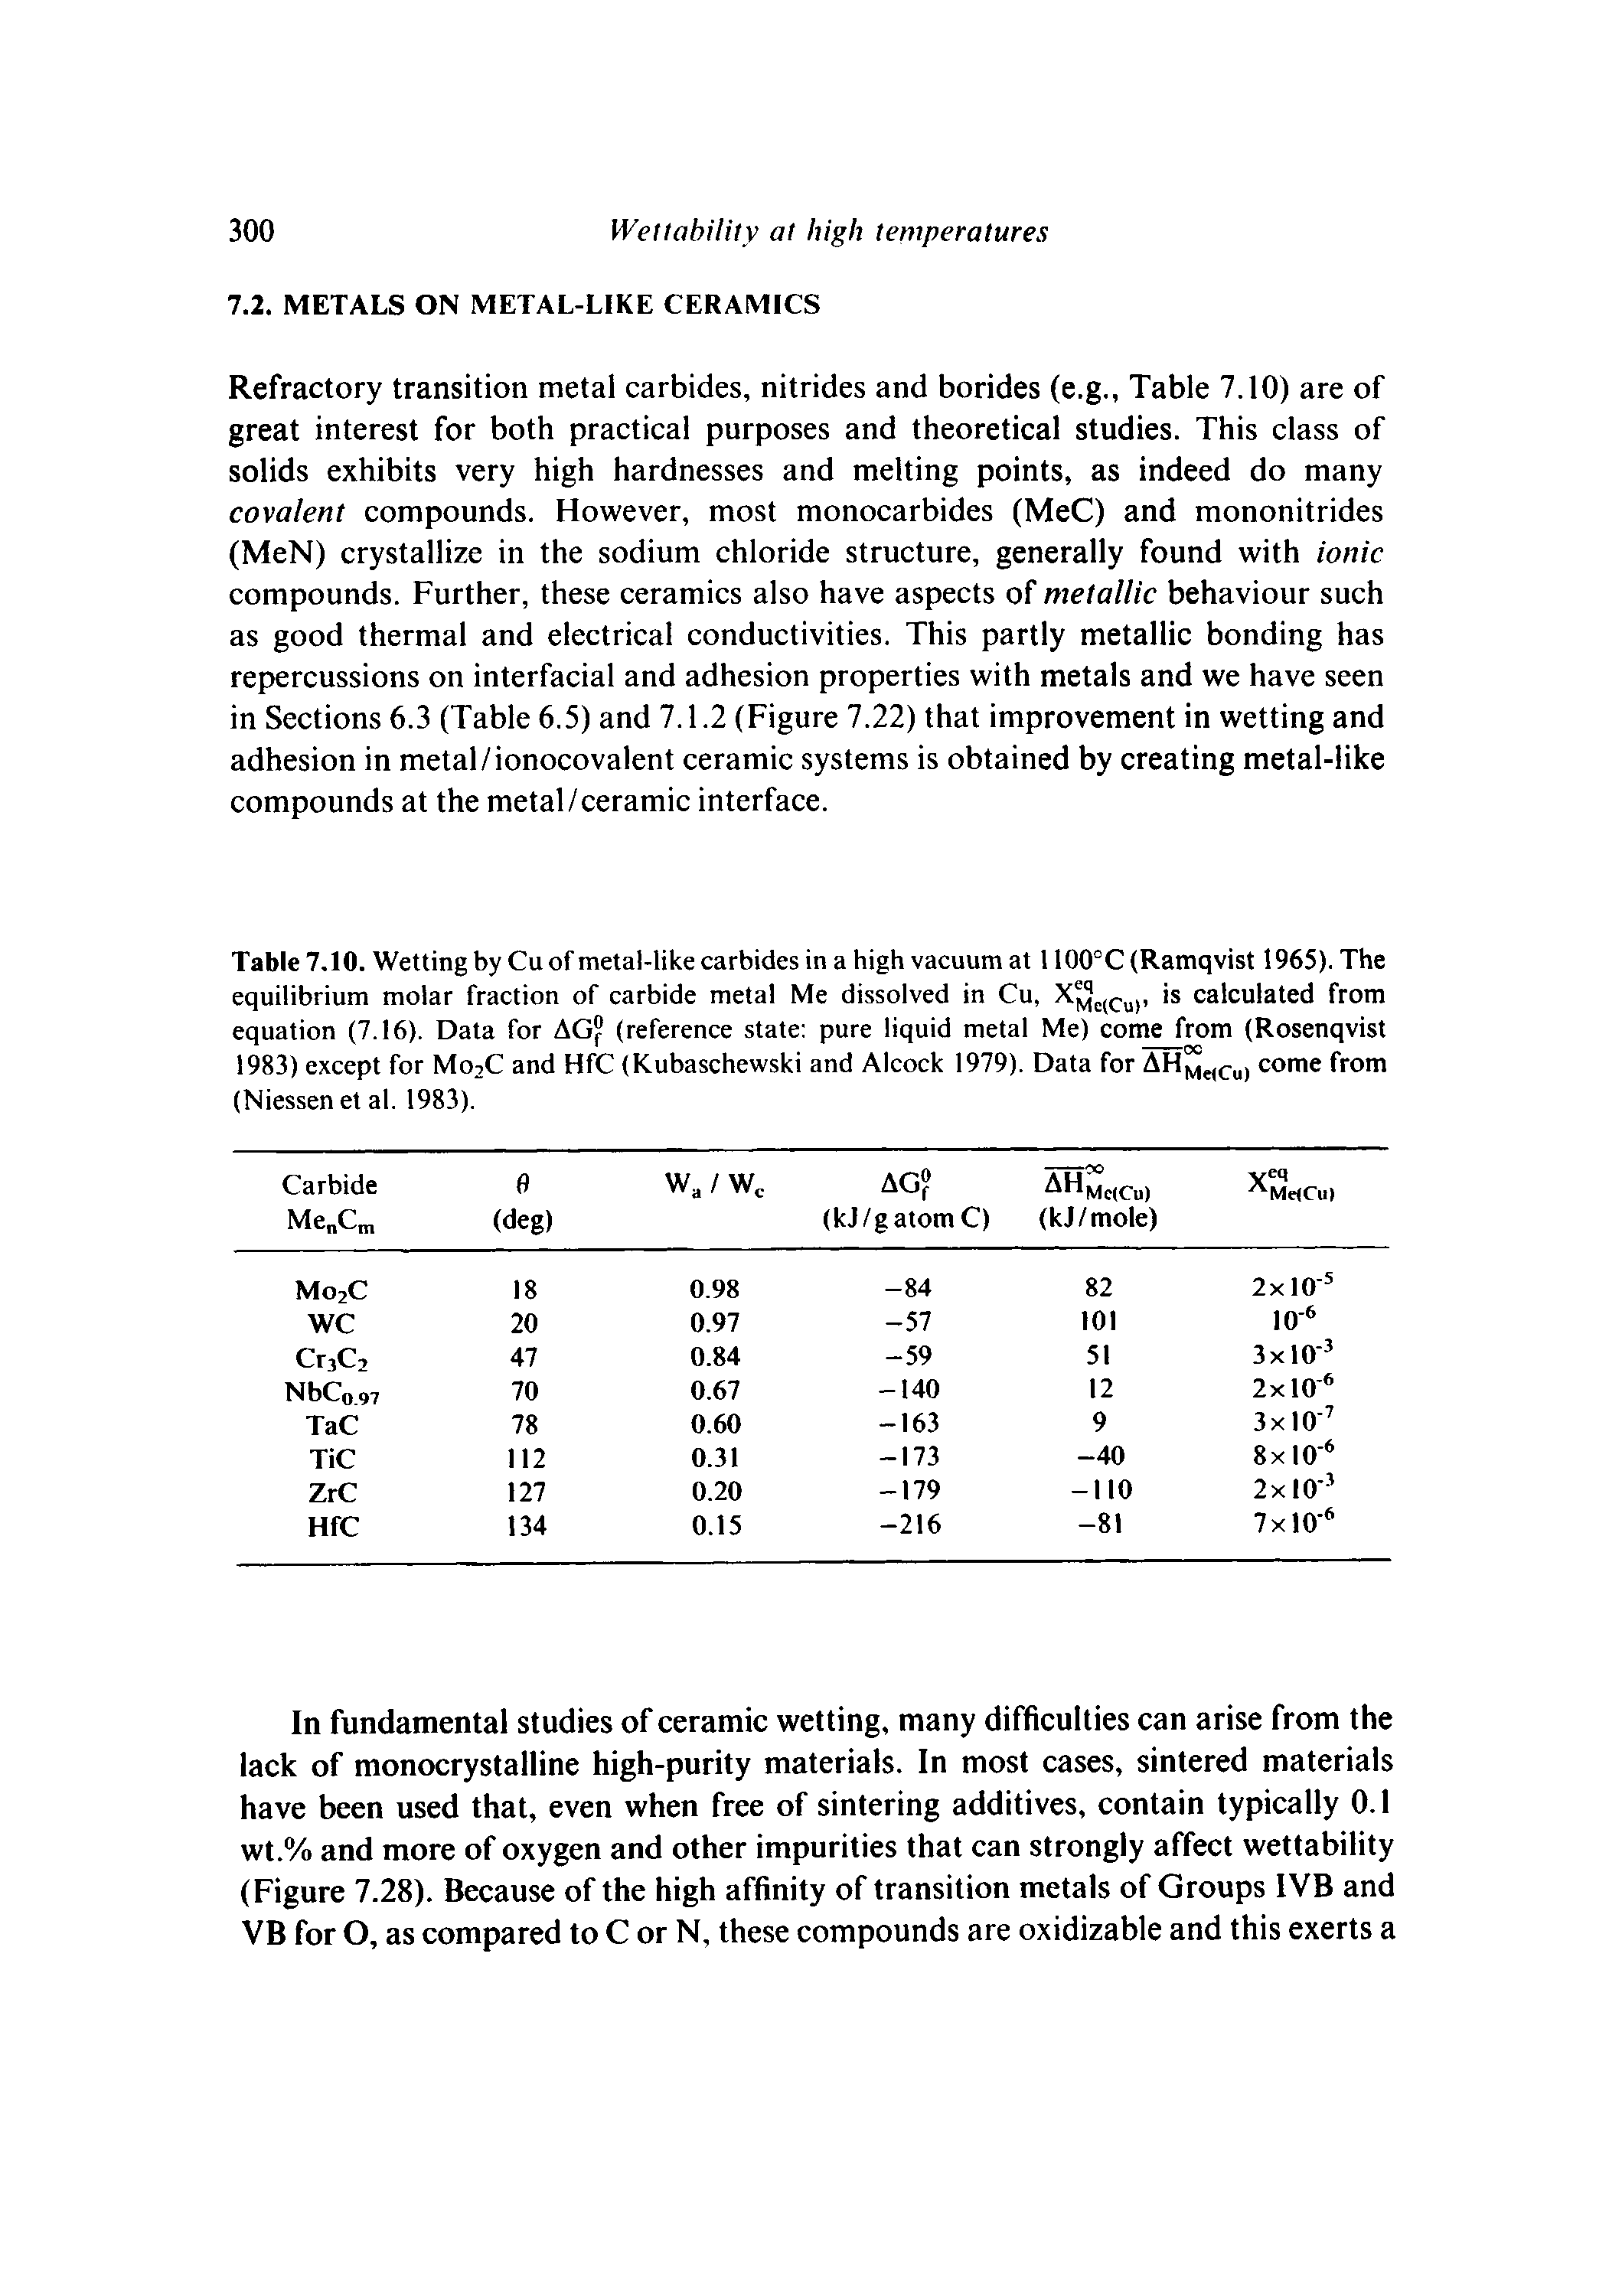 Table 7.10. Wetting by Cu of metal-like carbides in a high vacuum at 1100°C(Ramqvist 1965). The equilibrium molar fraction of carbide metal Me dissolved in Cu, X c(Cu), is calculated from equation (7.16). Data for AG (reference state pure liquid metal Me) come from (Rosenqvist 1983) except for Mo2C and HfC (Kubaschewski and Alcock 1979). Data for AHMe(Cu) come from (Niessen et al. 1983).